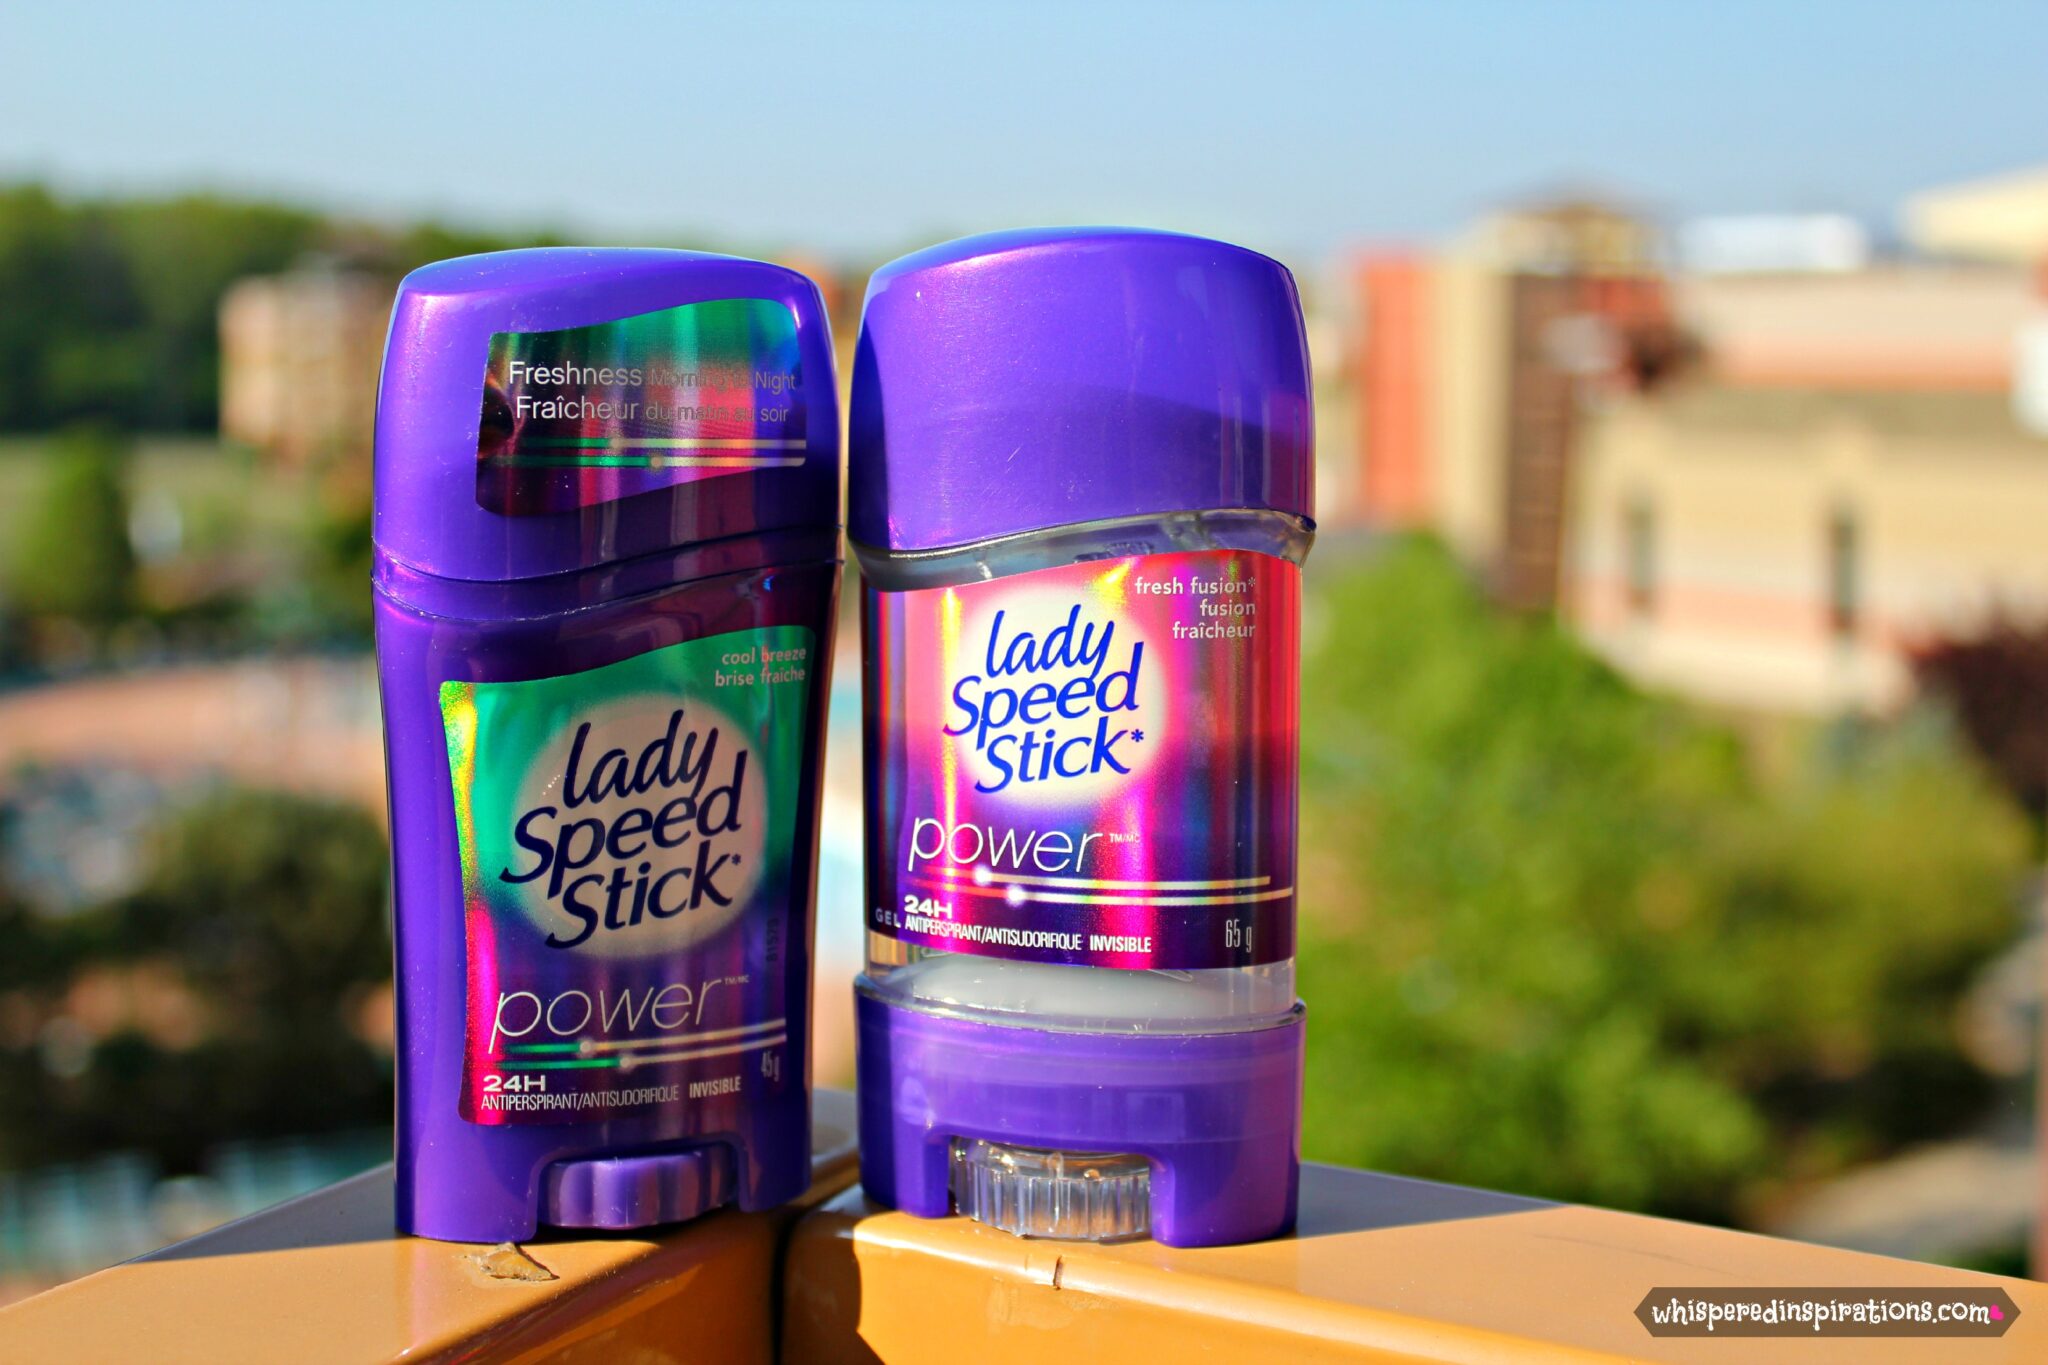 Lady Speed Stick: Long Lasting Superior Protection, So That You Don’t Sweat It, You HANDLE IT! #DontSweatIt